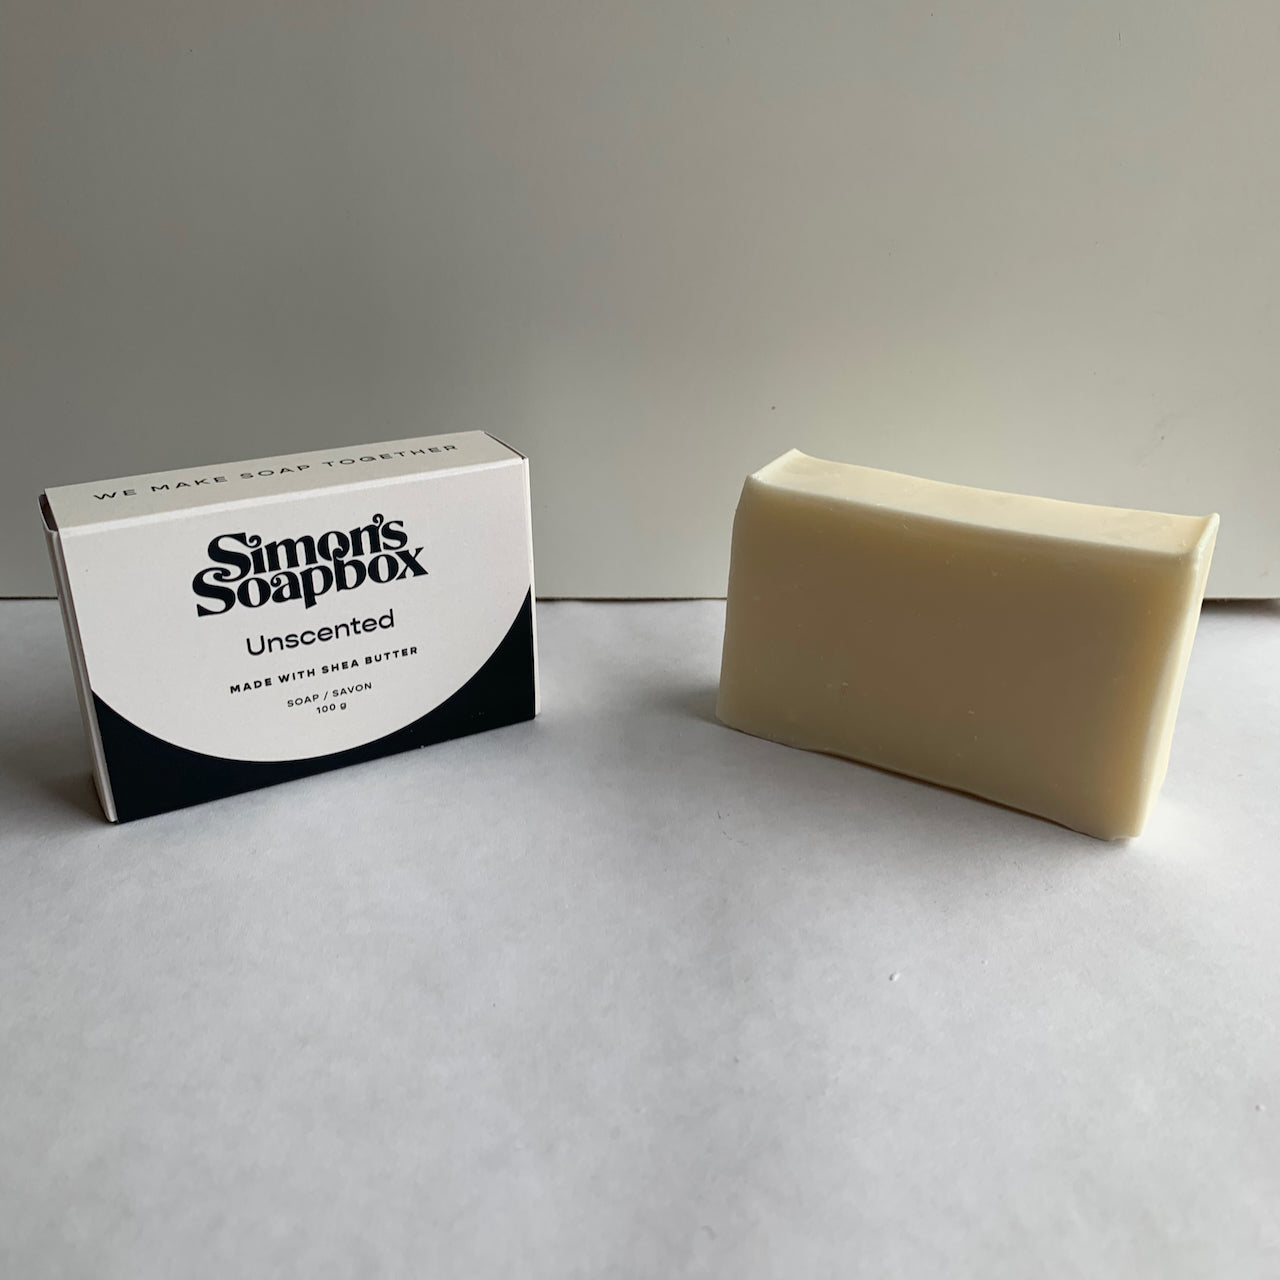 two bars of soap, one in a package, one cream bar unwrapped